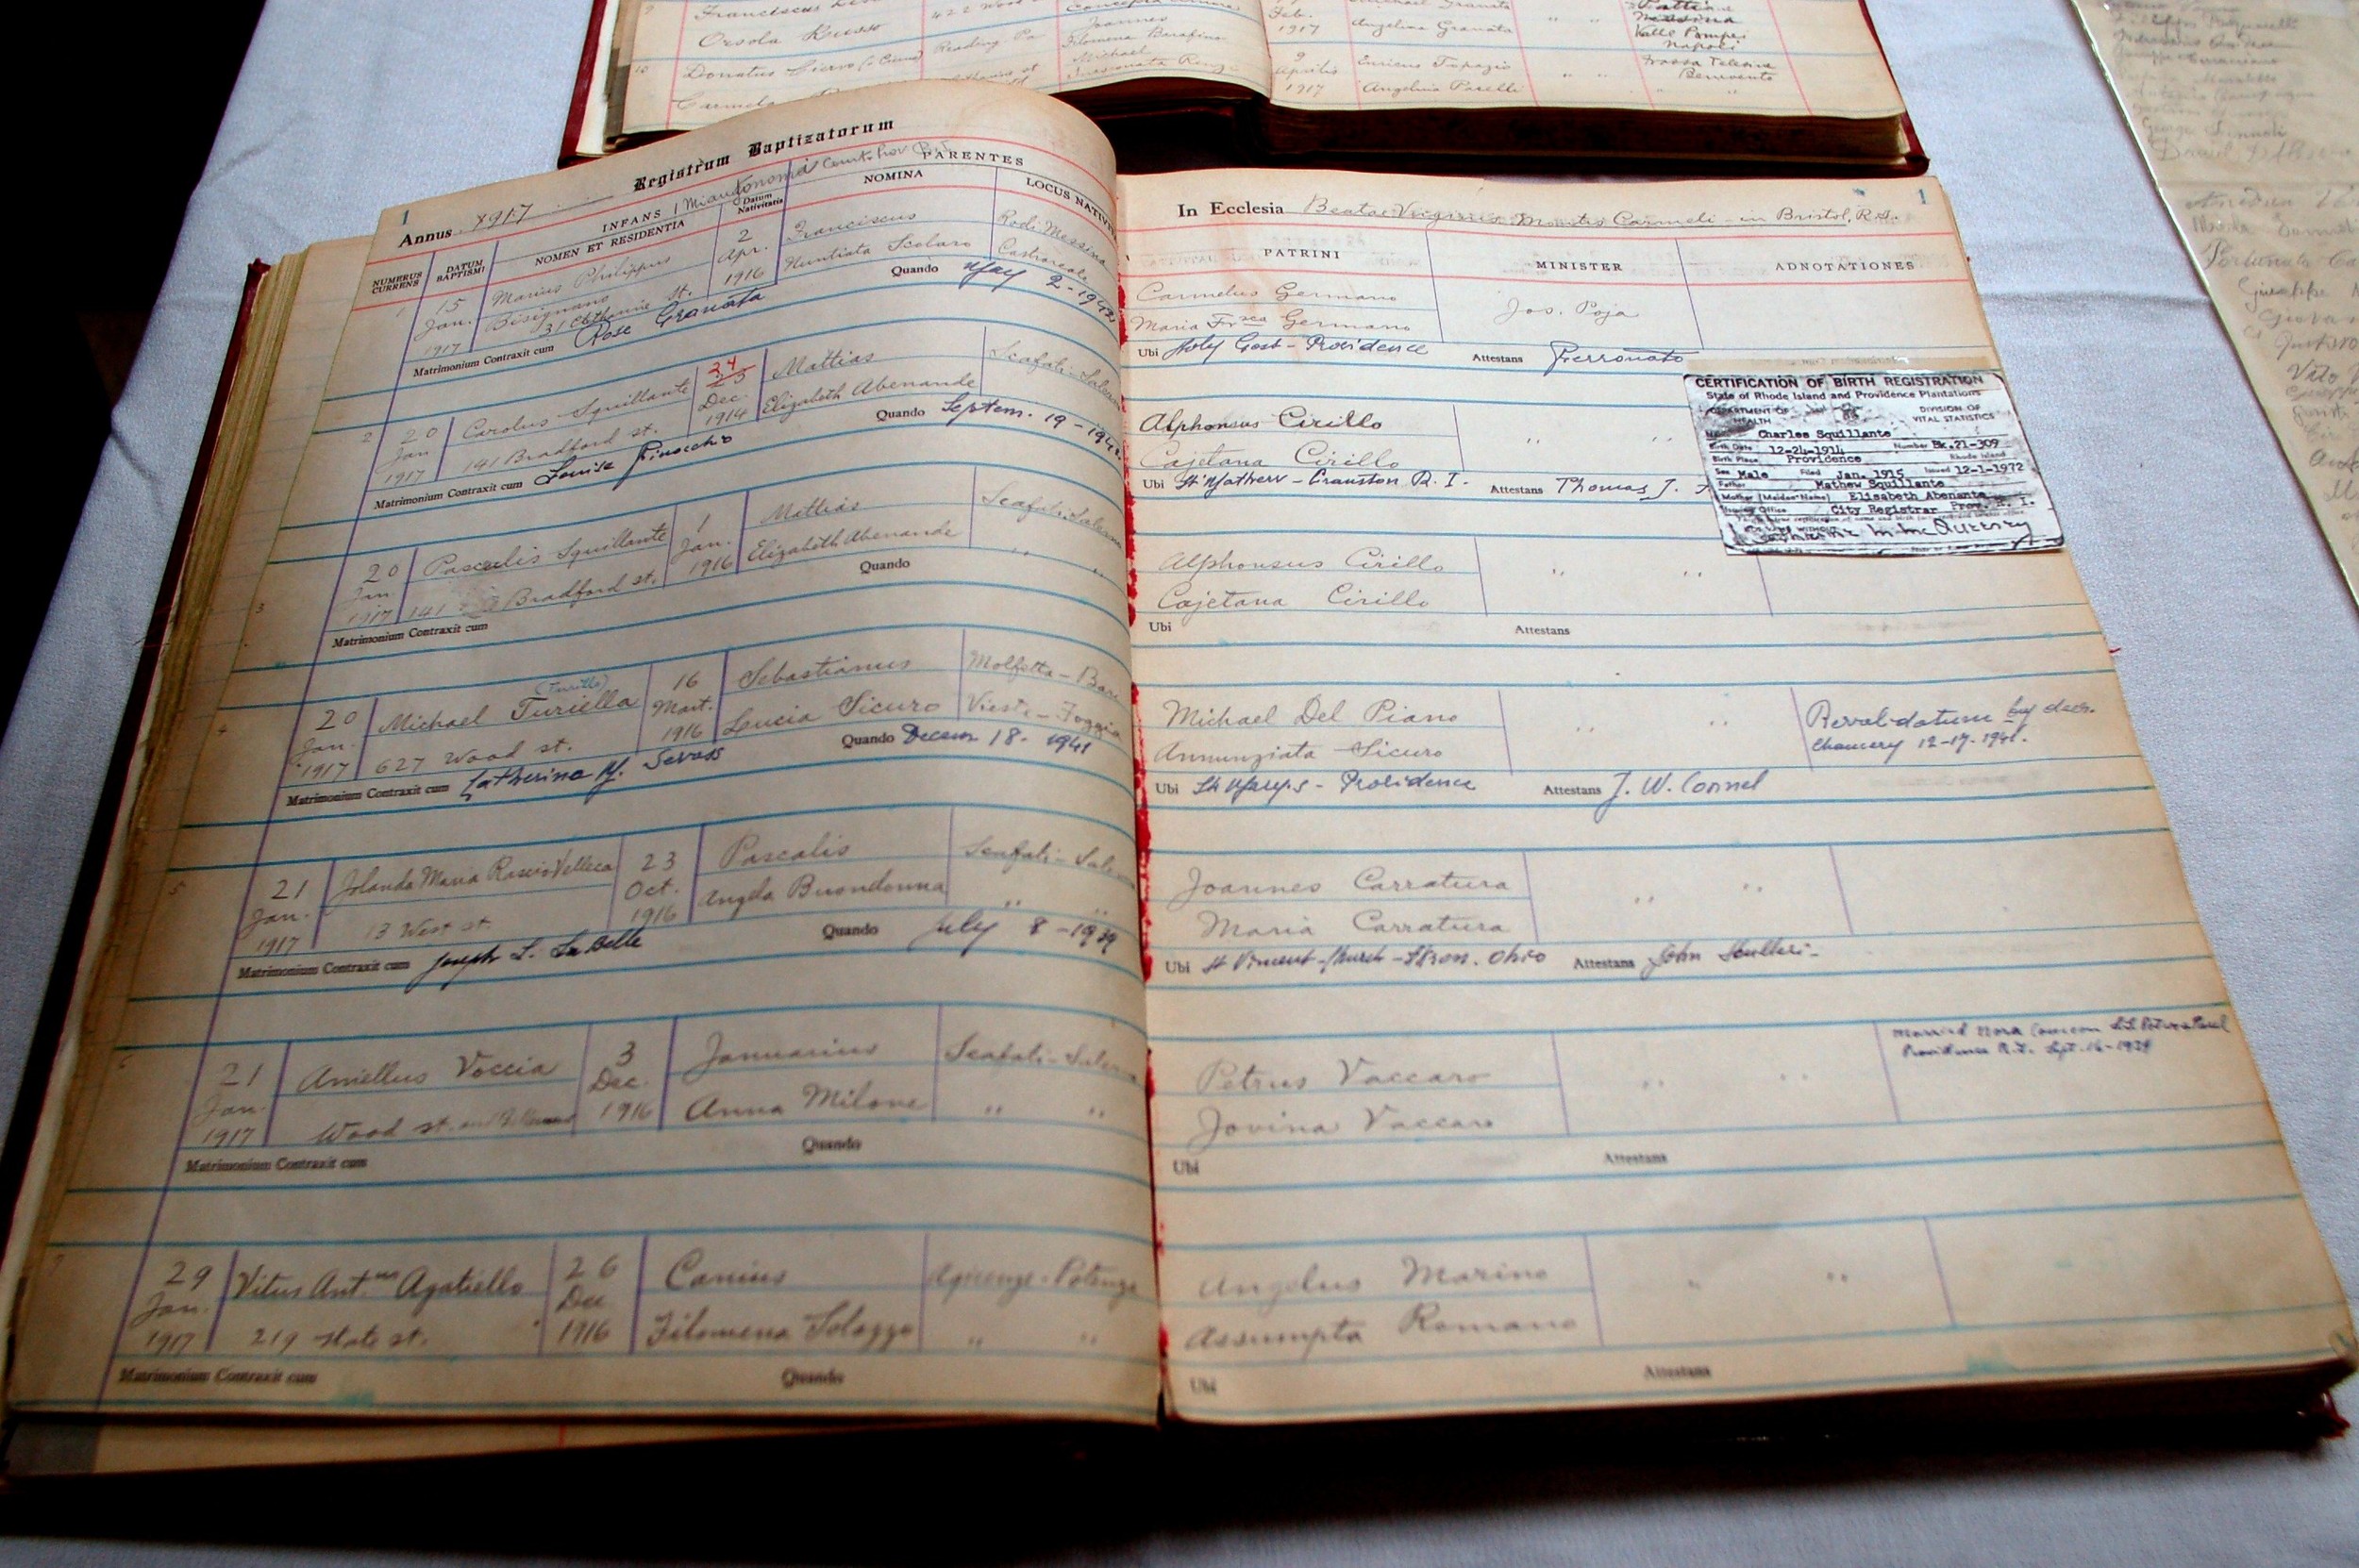 The original Baptismal register dating back 100 years when Our Lady of Mt. Carmel Church was founded.